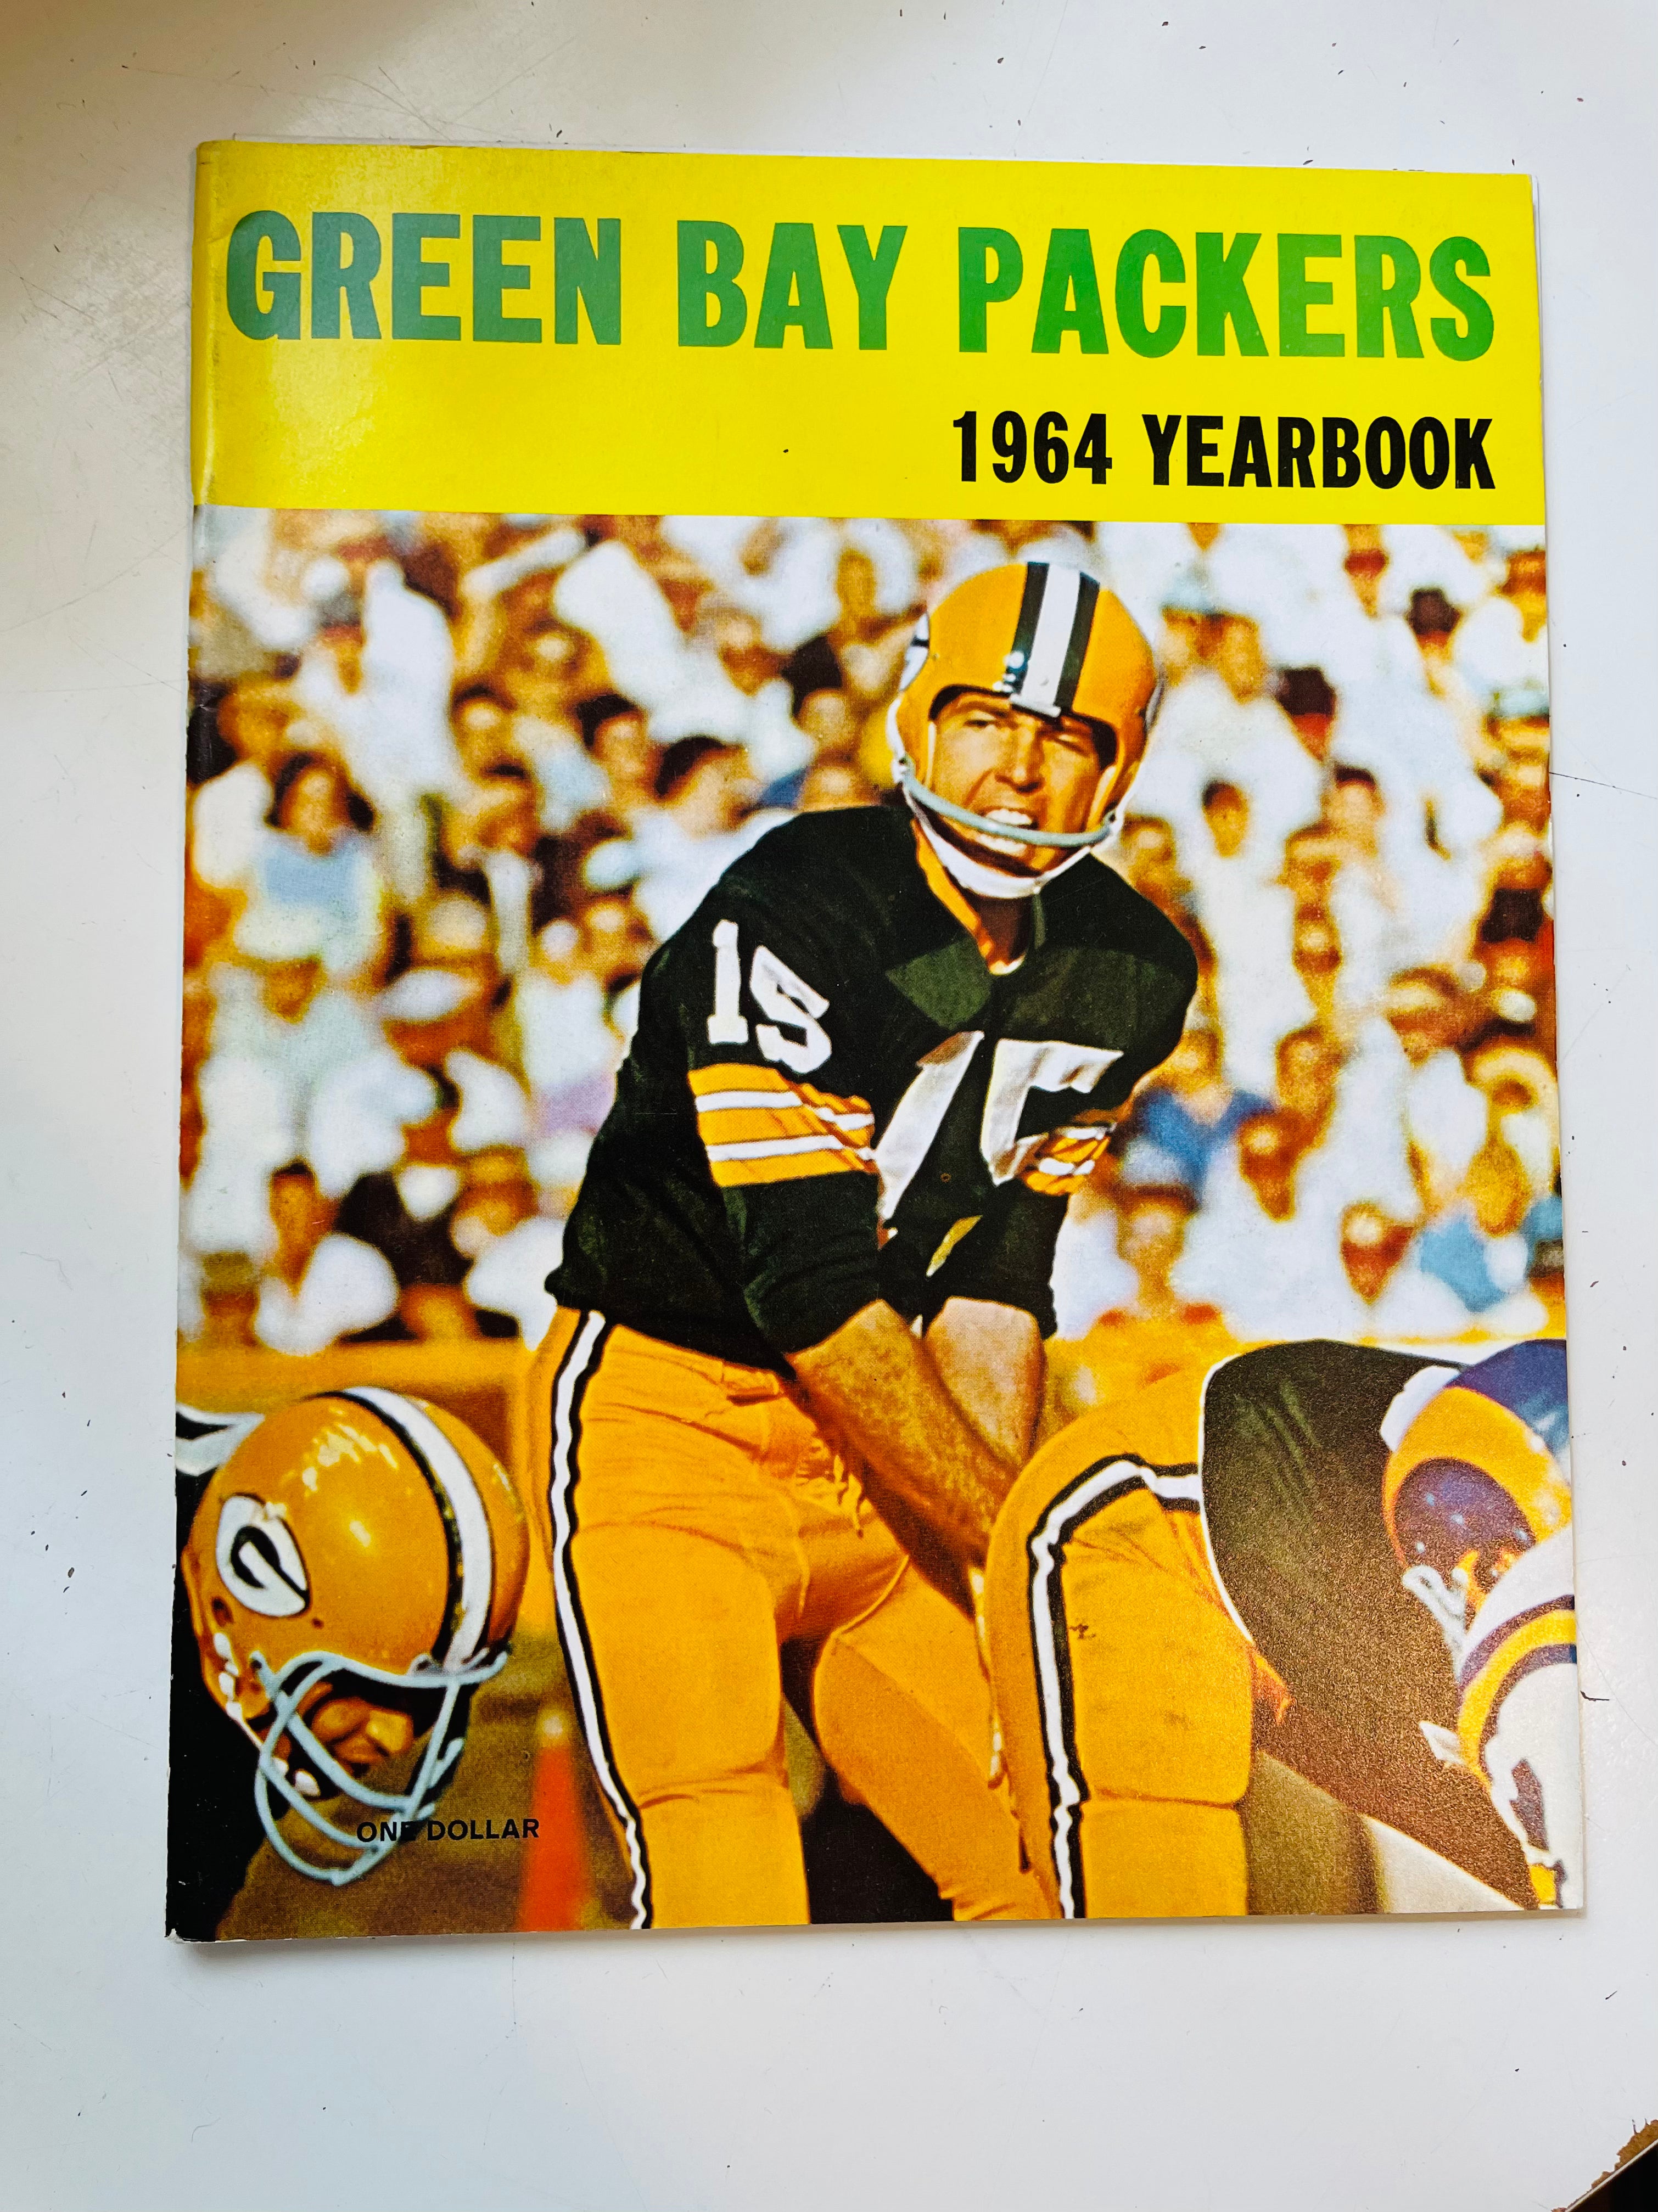 1964 Green Bay Packers rare football yearbook